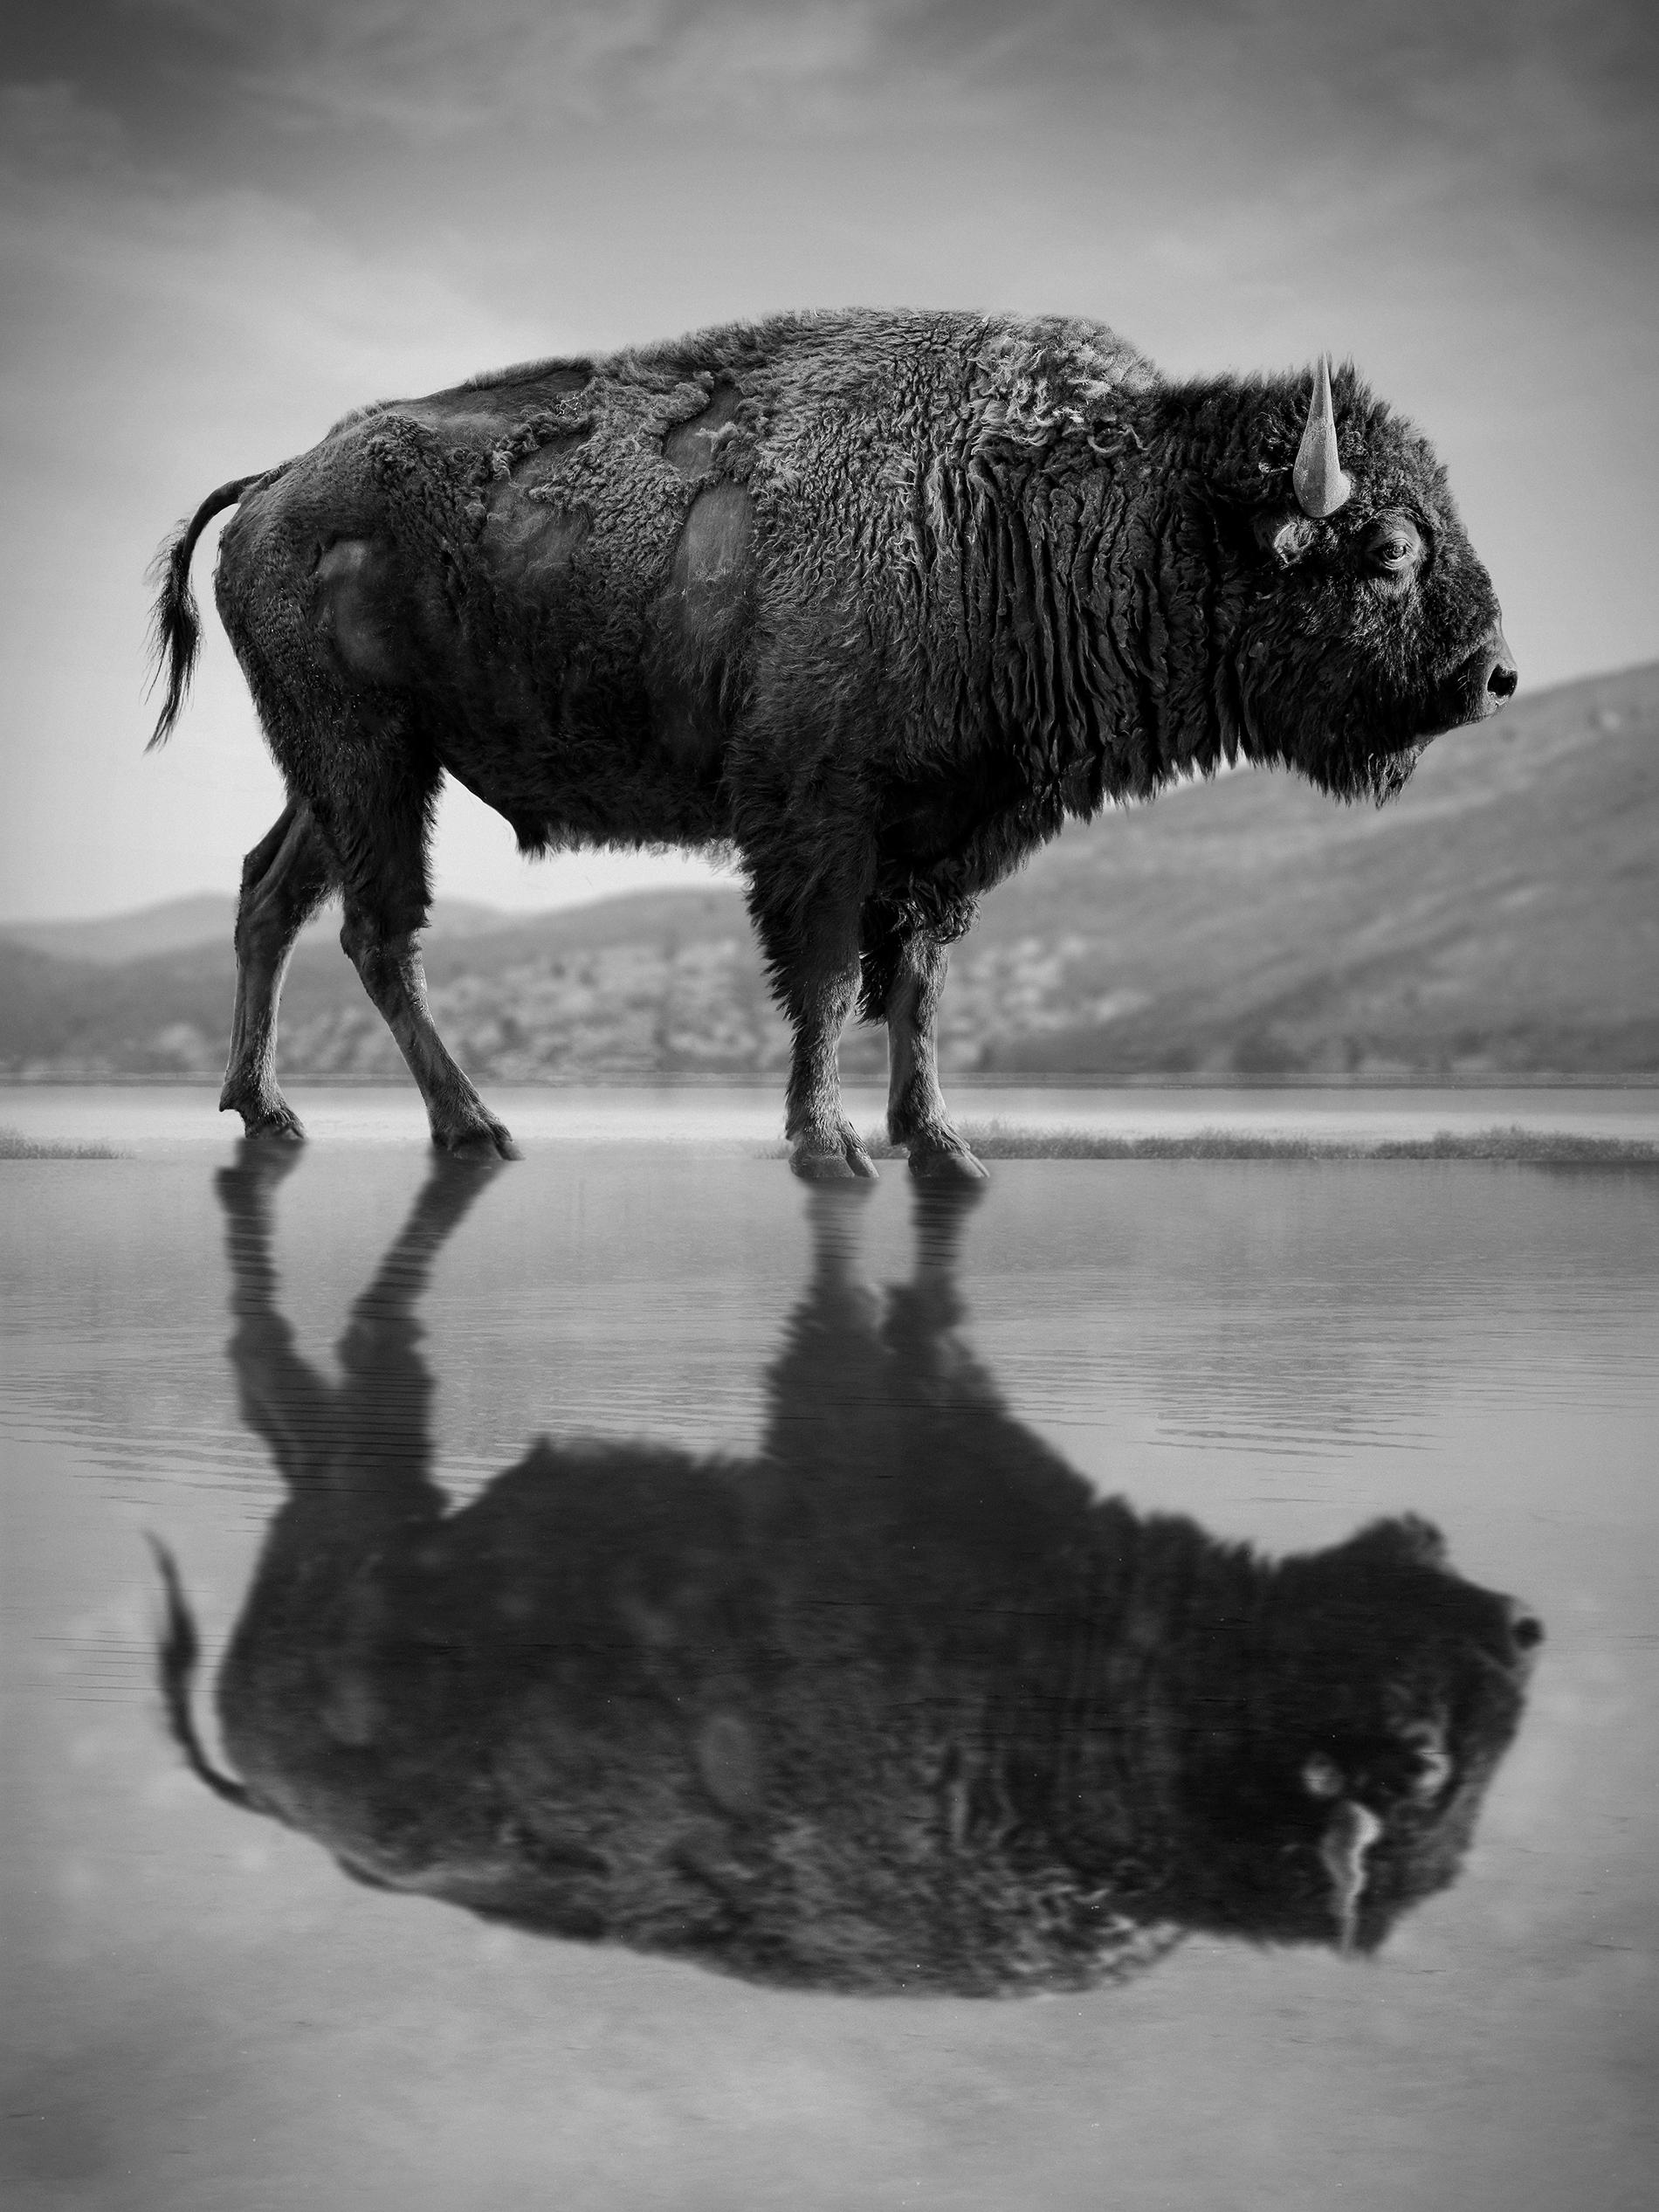 Shane Russeck Animal Print - "Old World" 60x40  Black & White Photography Bison Buffalo Unsigned Photograph